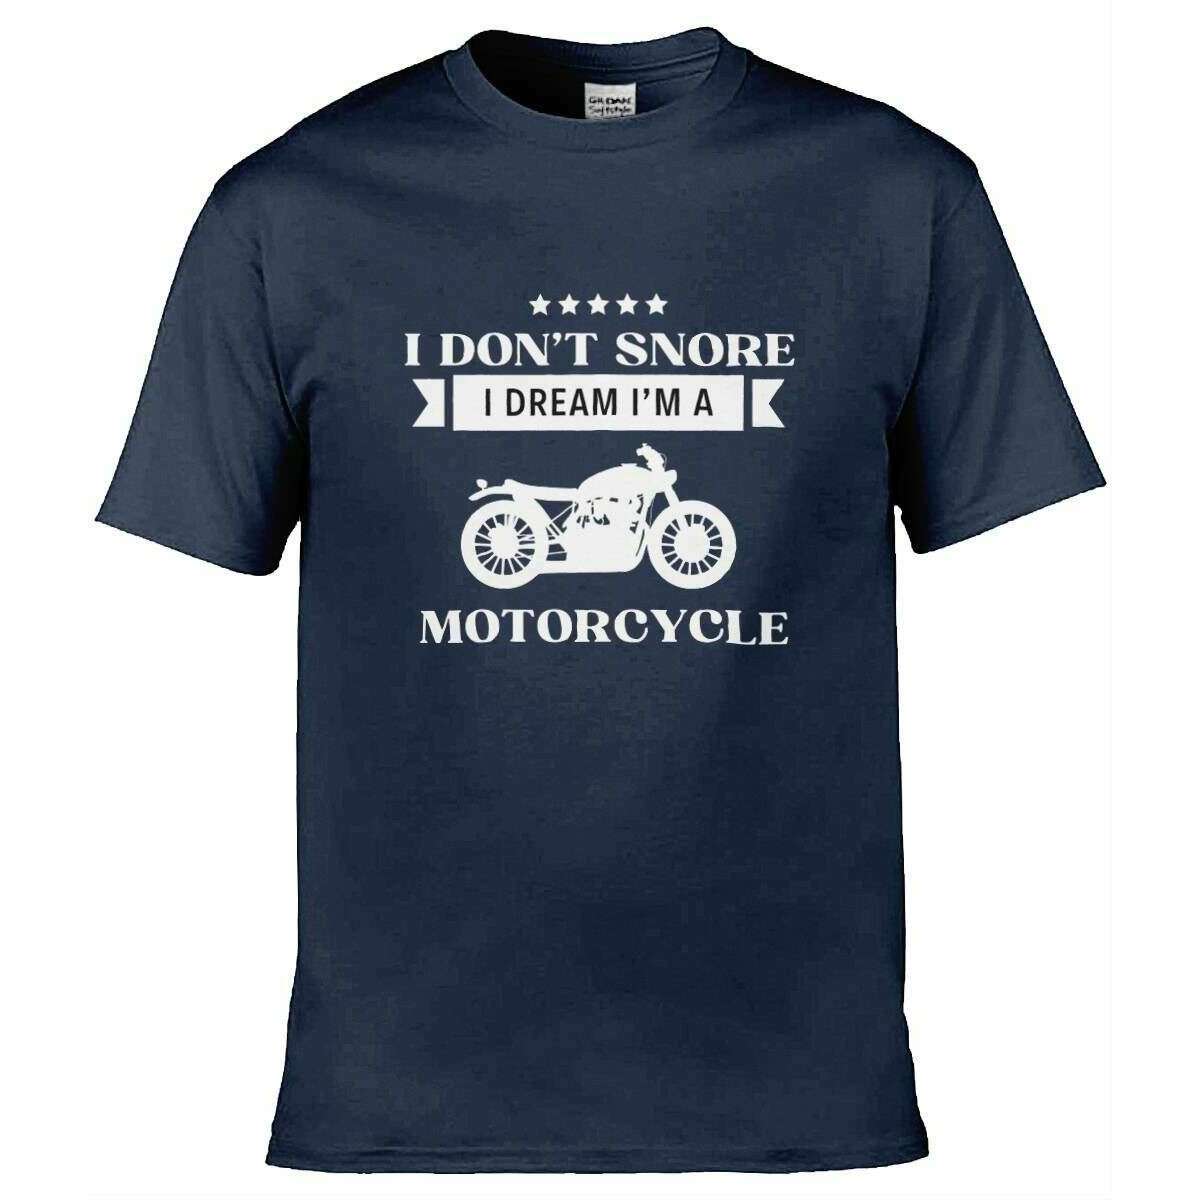 Teemarkable! I Don’t Snore I Dream I’m A Motorcycle T-Shirt